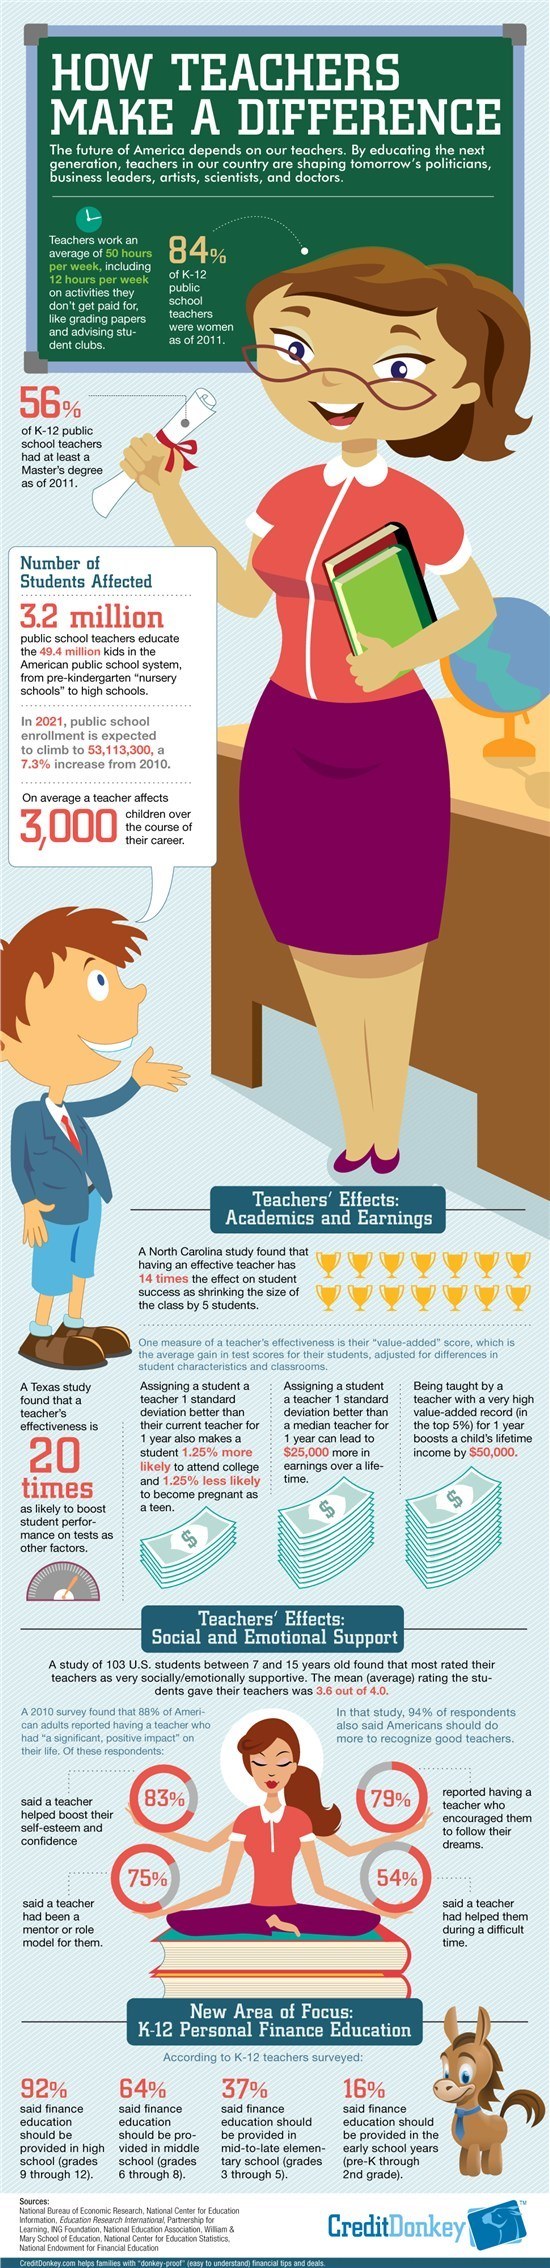 How Teachers Make a Difference Infographic